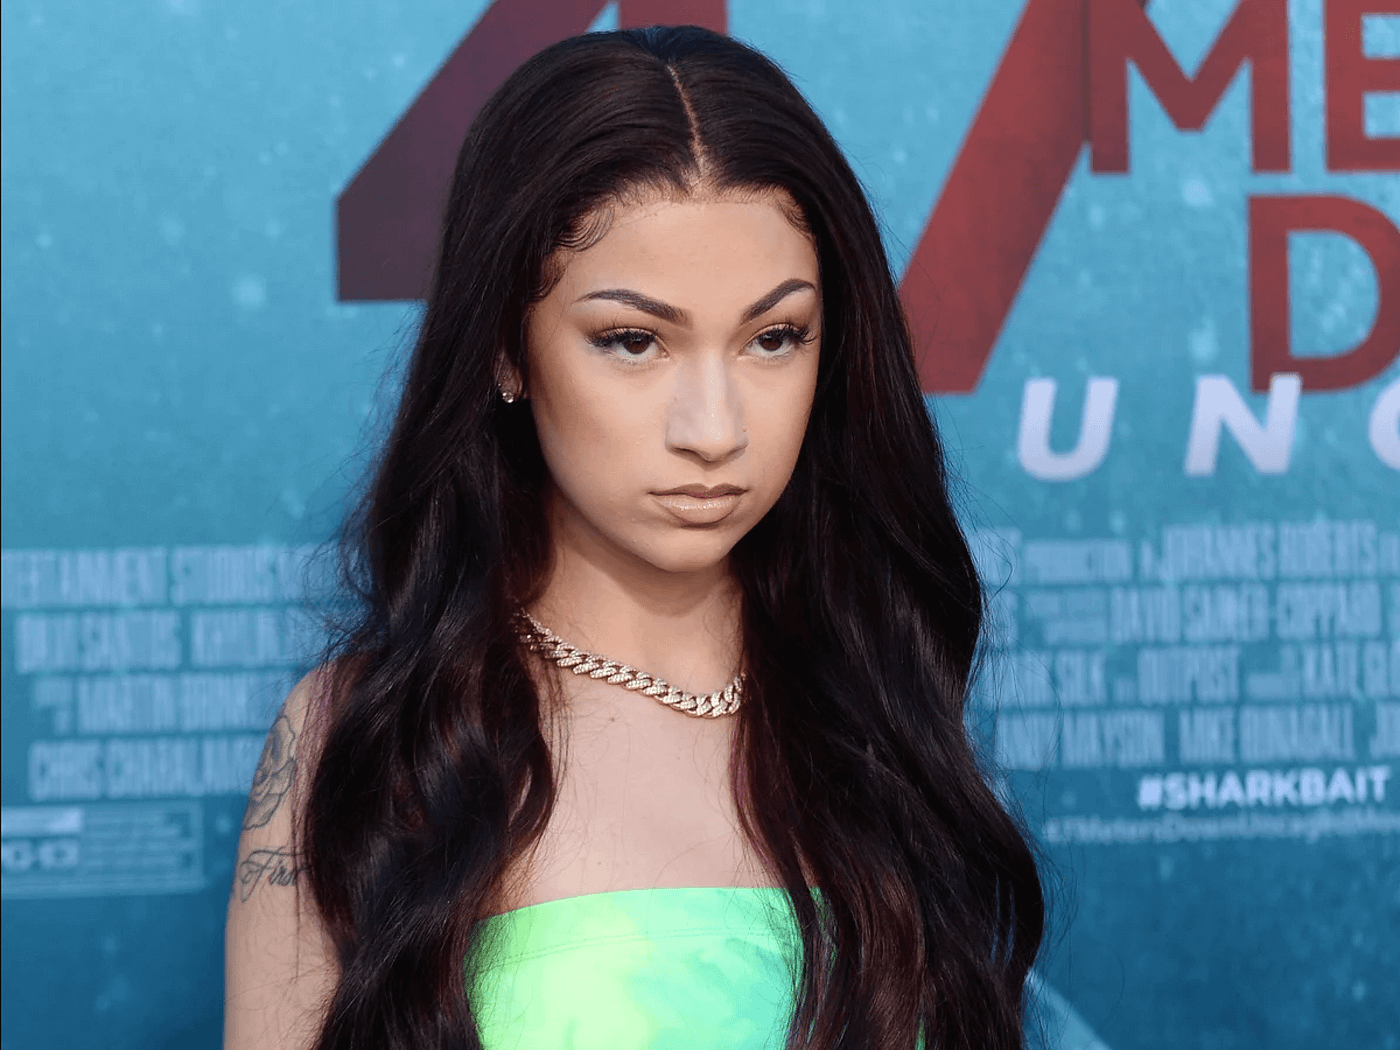 How the “Cash Me Outside” Girl Cashed In on $52.8 Million as the Last Viral  Internet Star | by Hudson Rennie | Better Marketing